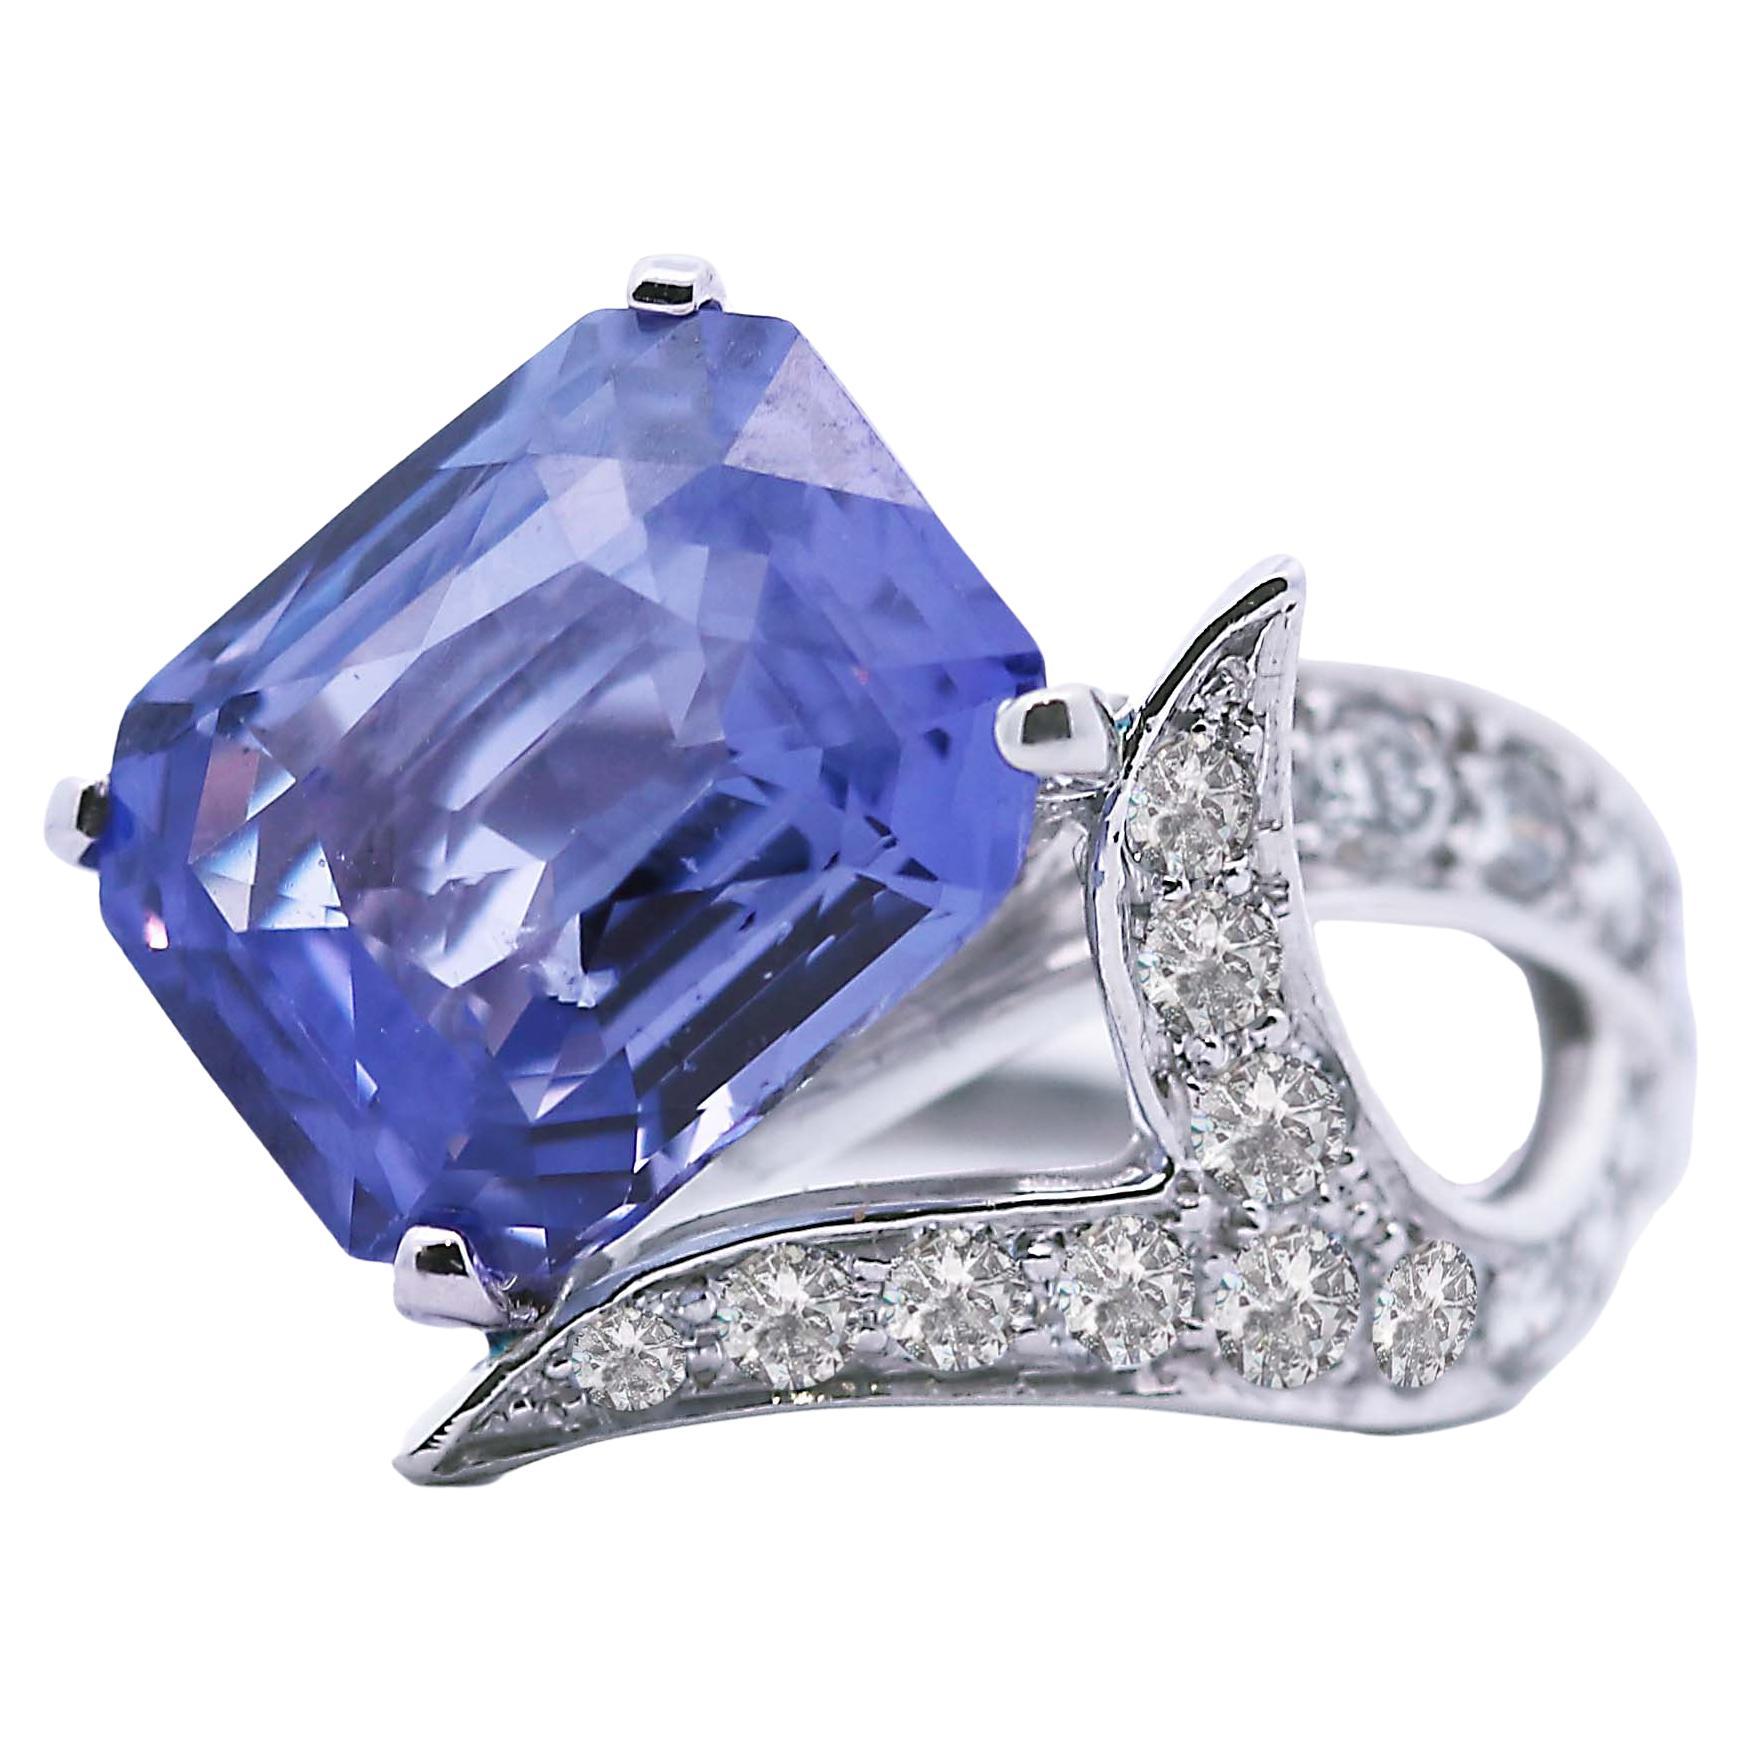 What is a color-change sapphire?